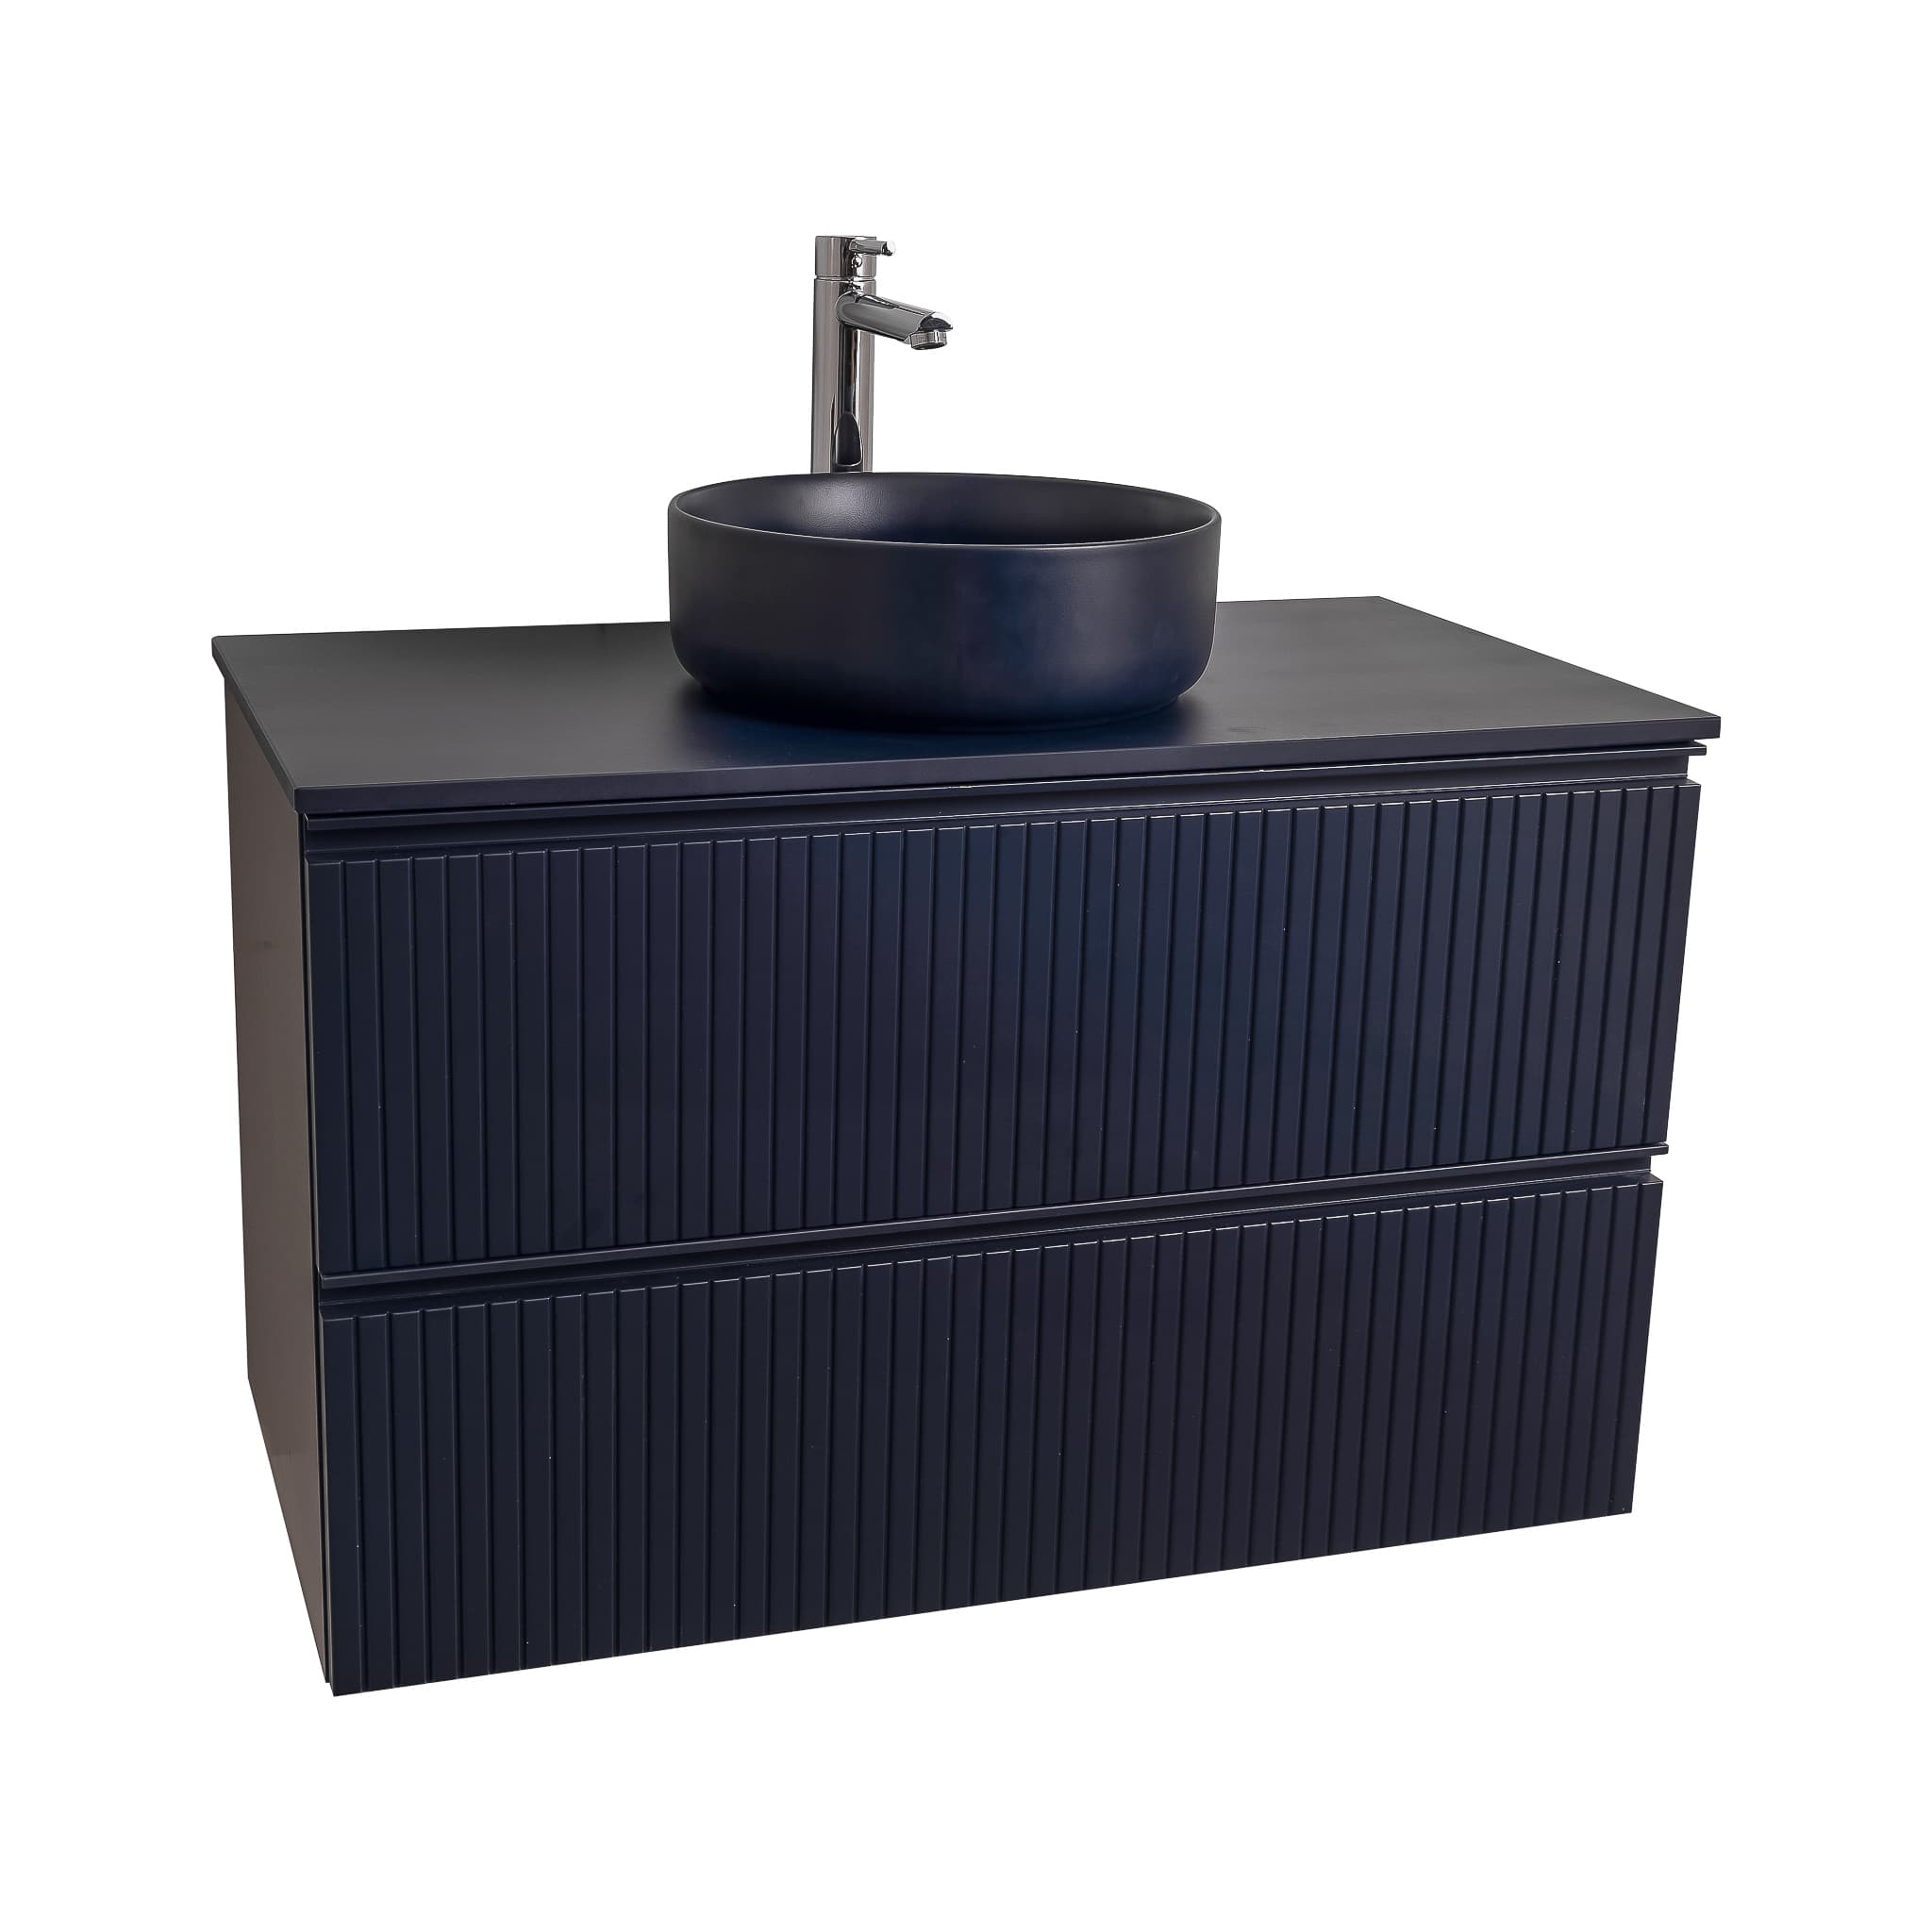 Ares 39.5 Matte Navy Blue Cabinet, Ares Navy Blue Top And Ares Navy Blue Ceramic Basin, Wall Mounted Modern Vanity Set